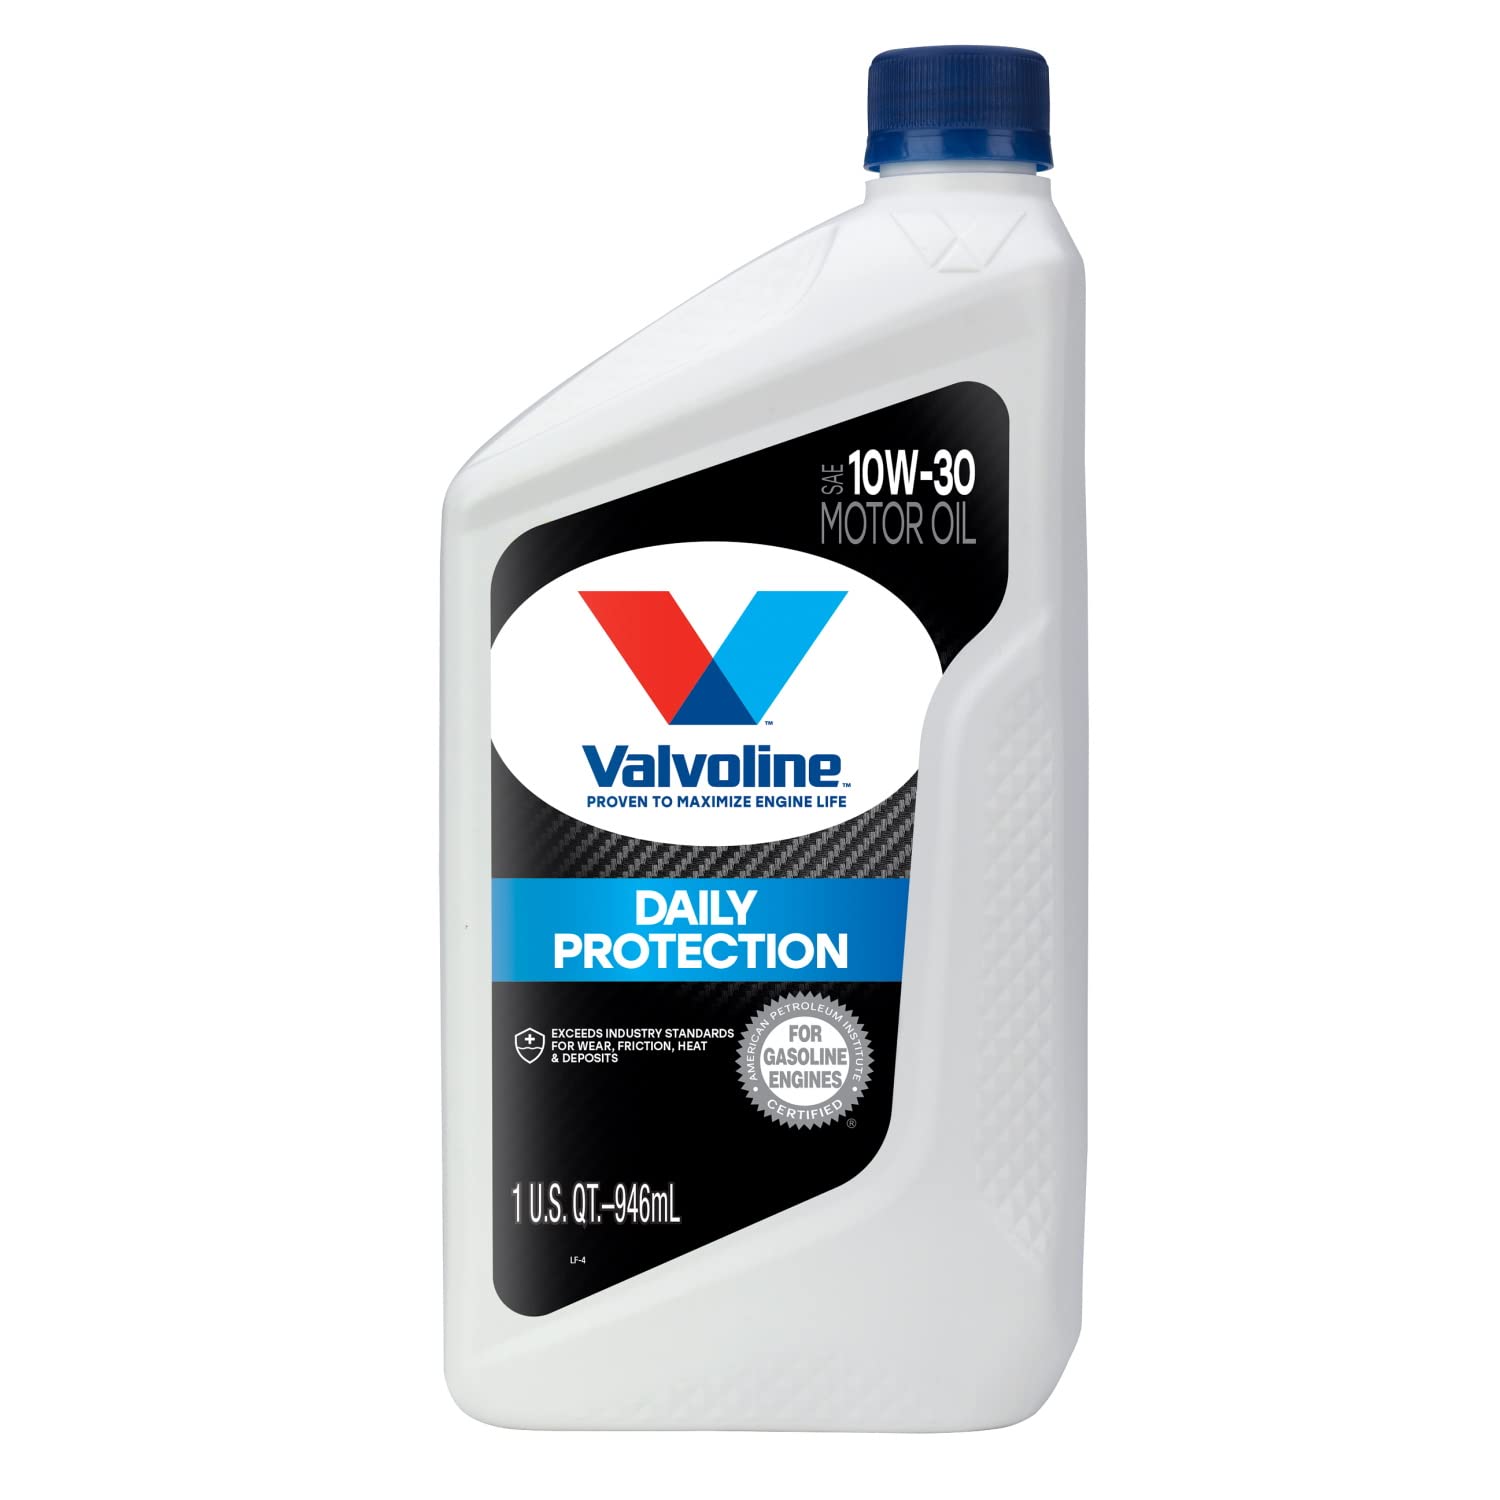 Case of 6 Valvoline Daily Protection 10W-30 Conventional Motor Oil 1 QT. $12.80